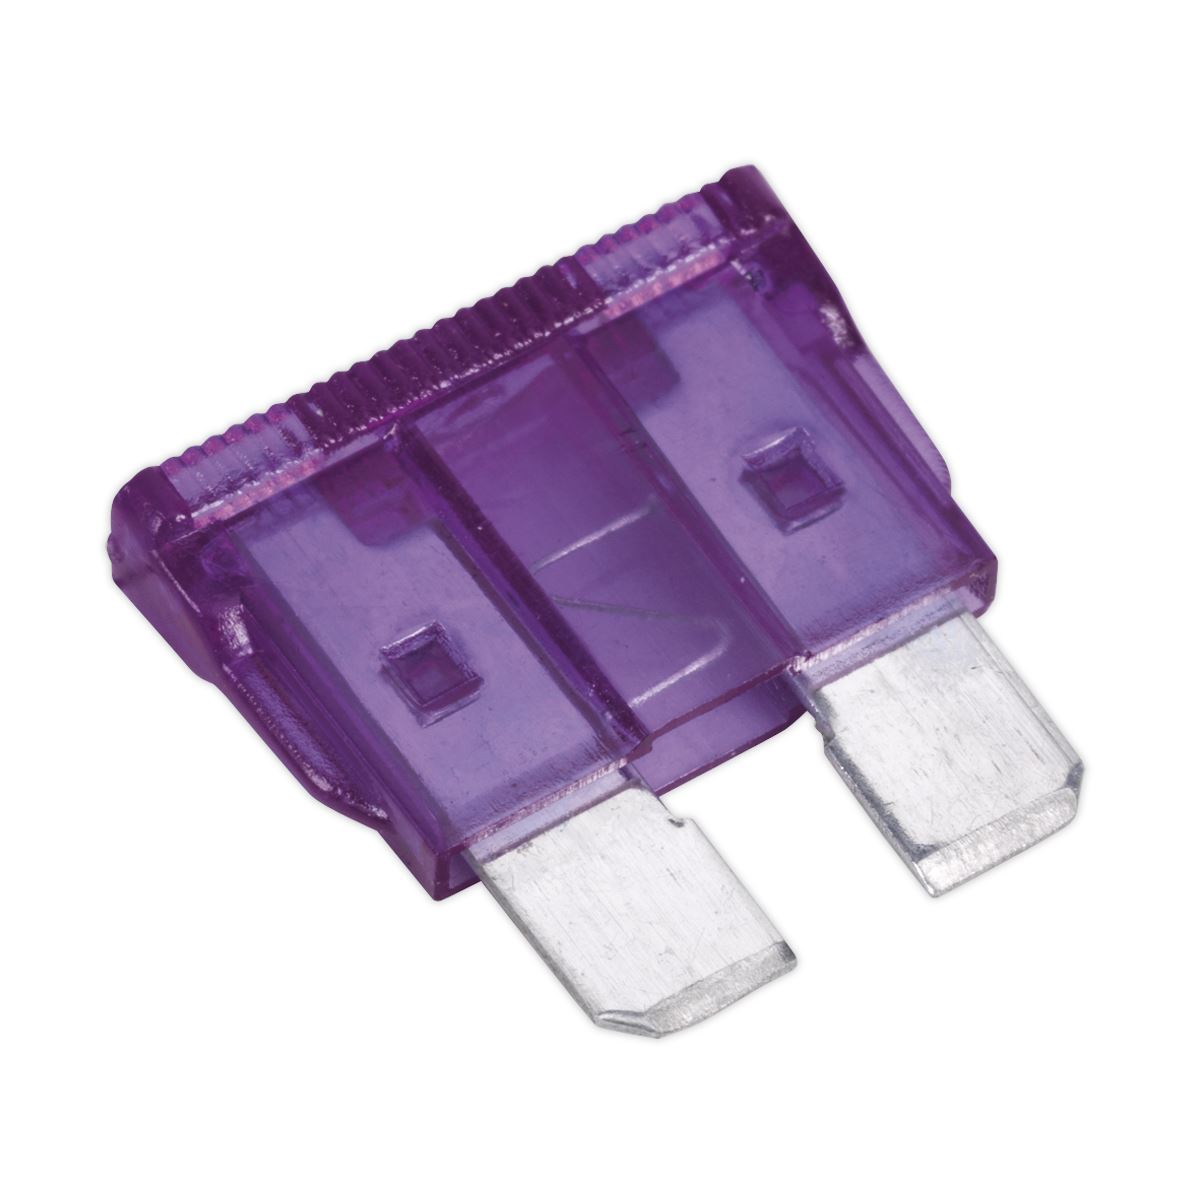 Sealey Automotive Standard Blade Fuse 3A Pack of 50